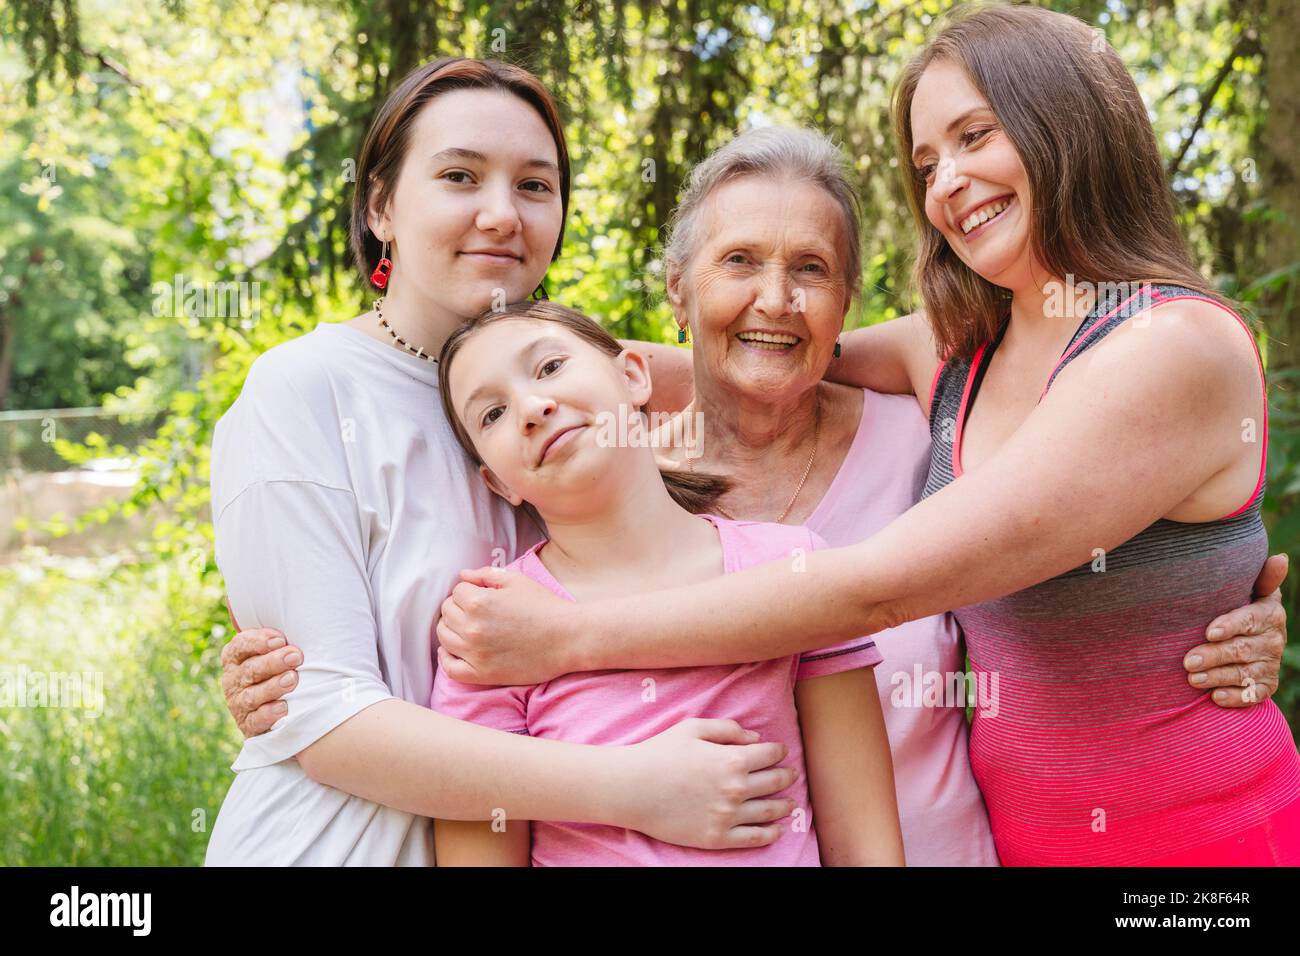 Happy senior woman with family standing together at park Stock Photo